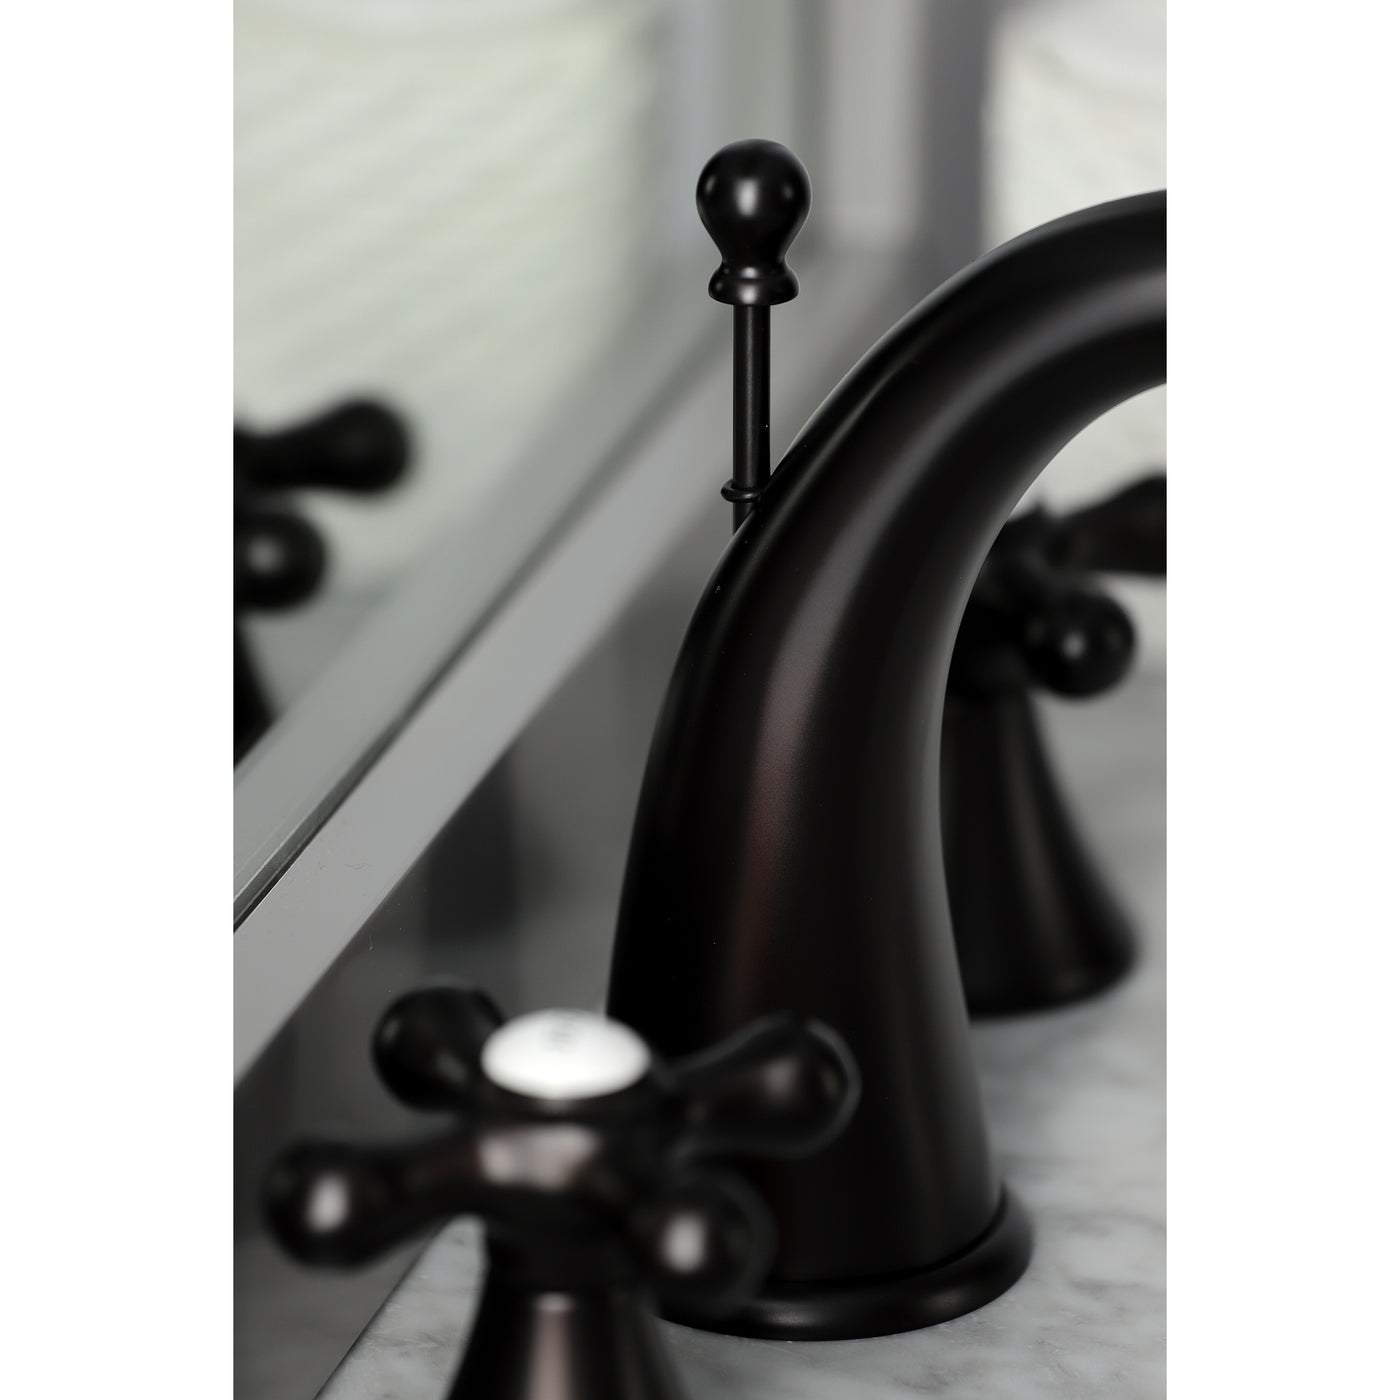 Elements of Design ES2975AX Widespread Bathroom Faucet with Brass Pop-Up, Oil Rubbed Bronze